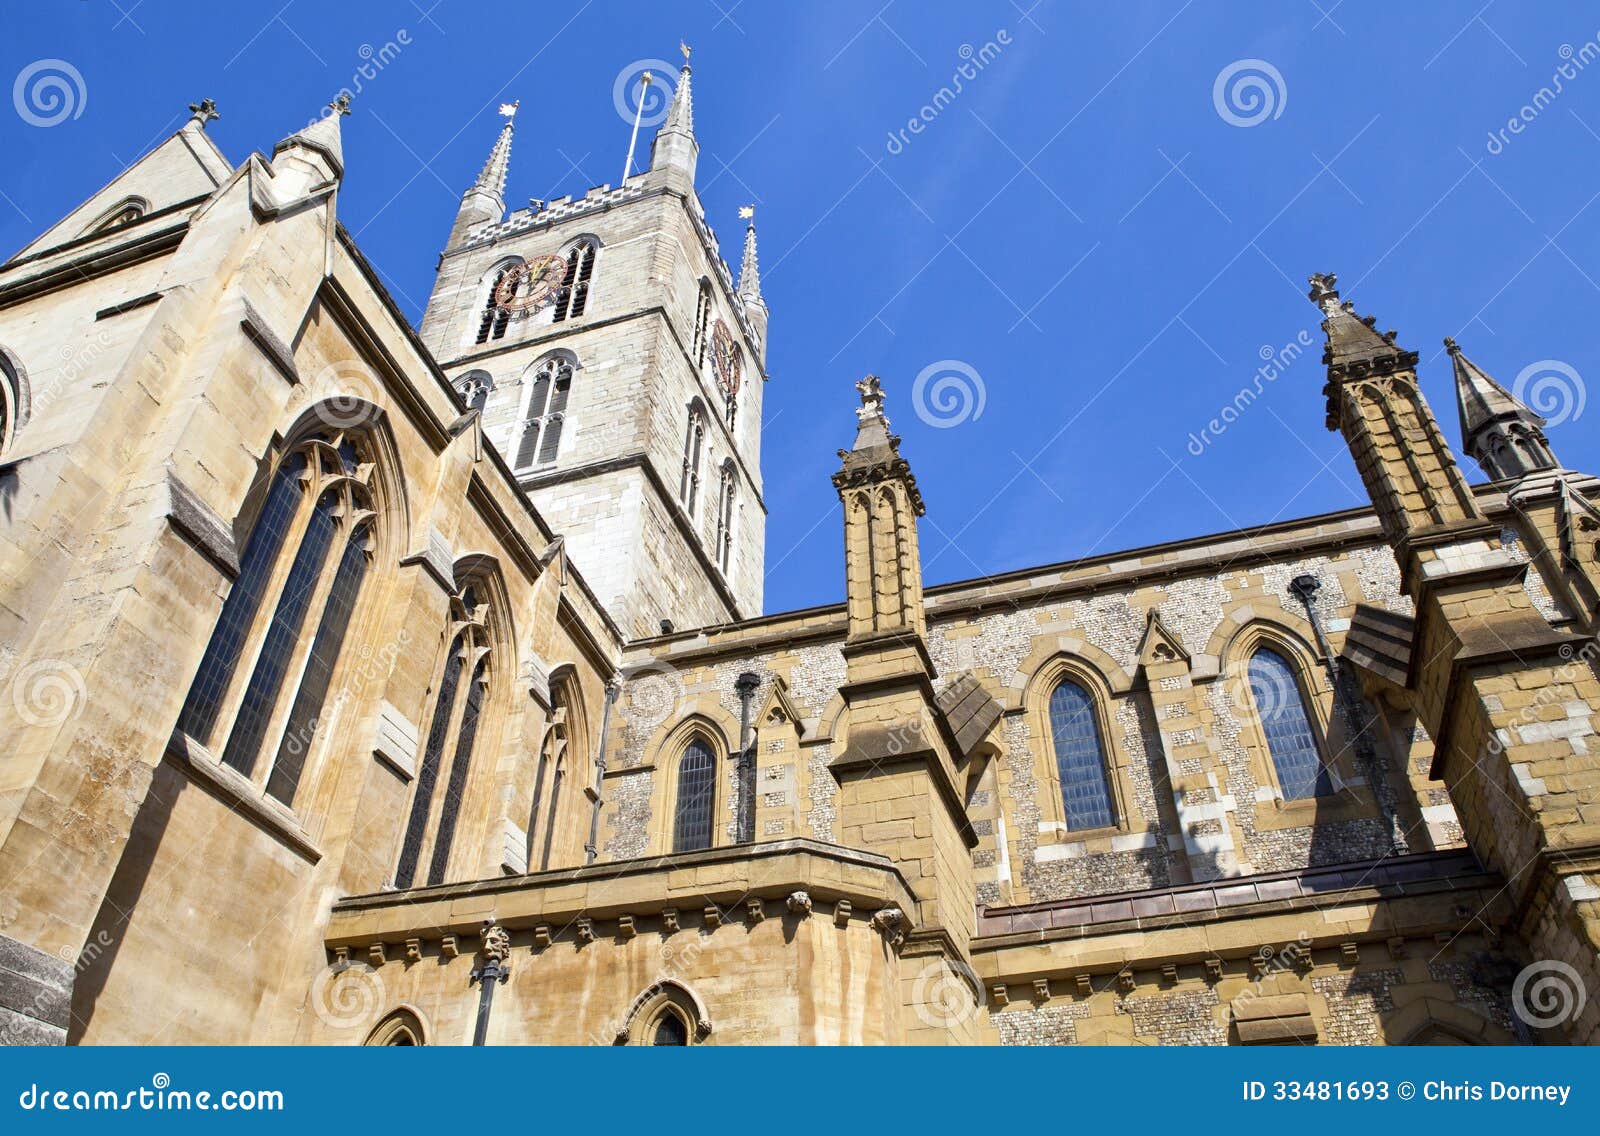 southwark cathedral in london